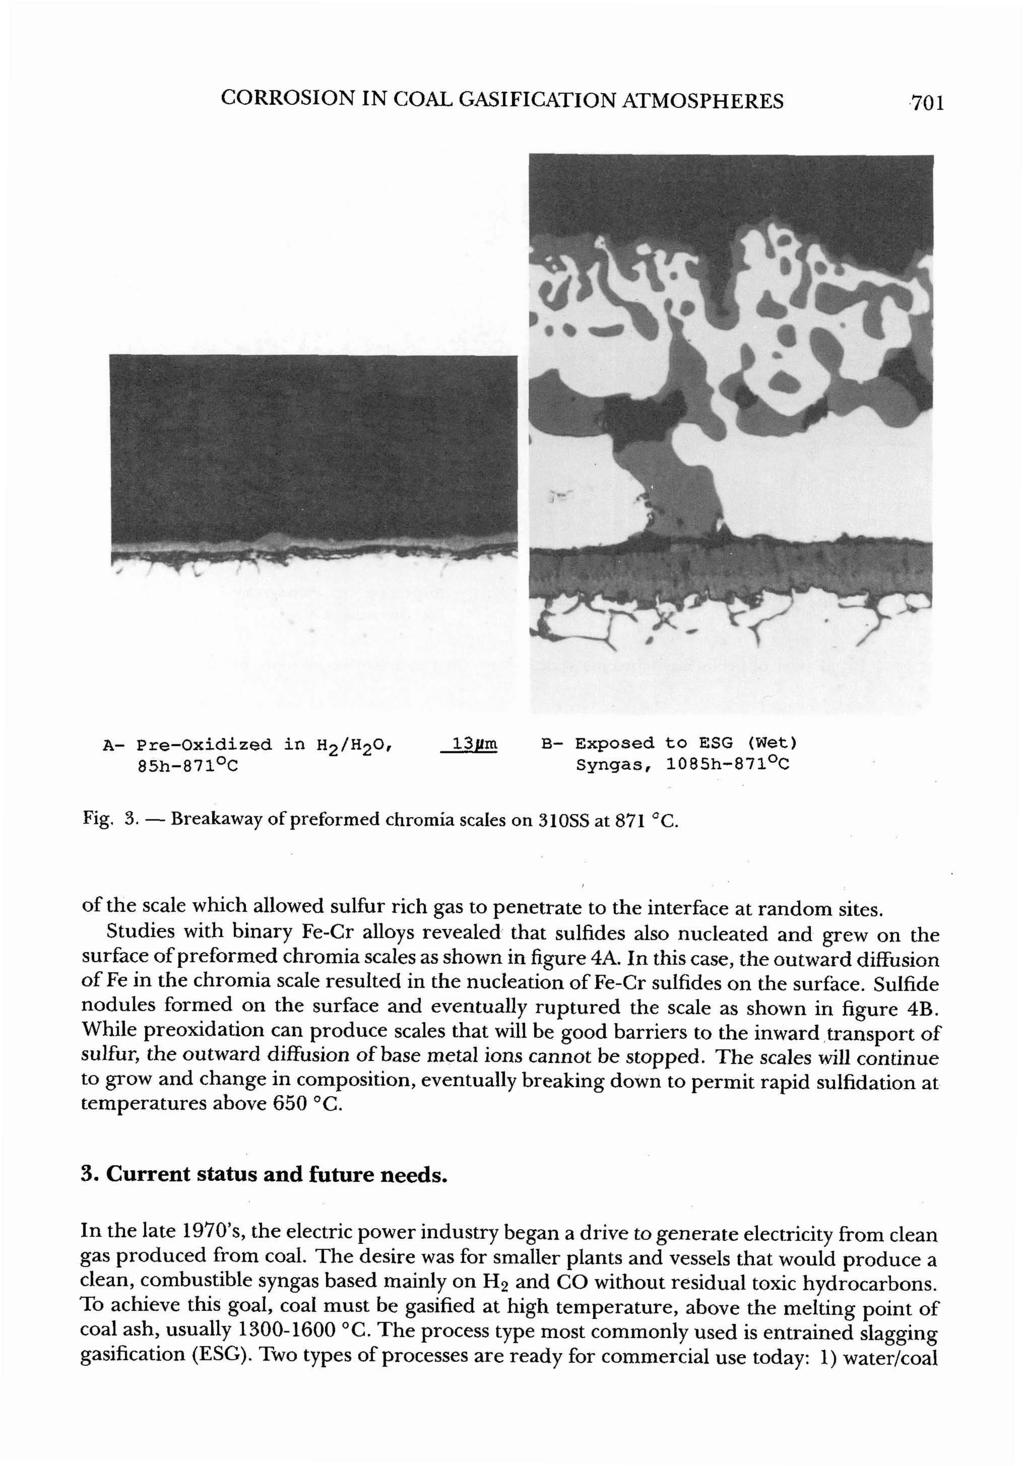 CORROSION IN COAL GASIFICATION ATMOSPHERES 70 1 A- pre-oxidized in H ~/H~O, 13~m B- Exposed to ESG (Wet) 85h-871 c Syngas, 1085h-871 c Fig. 3.